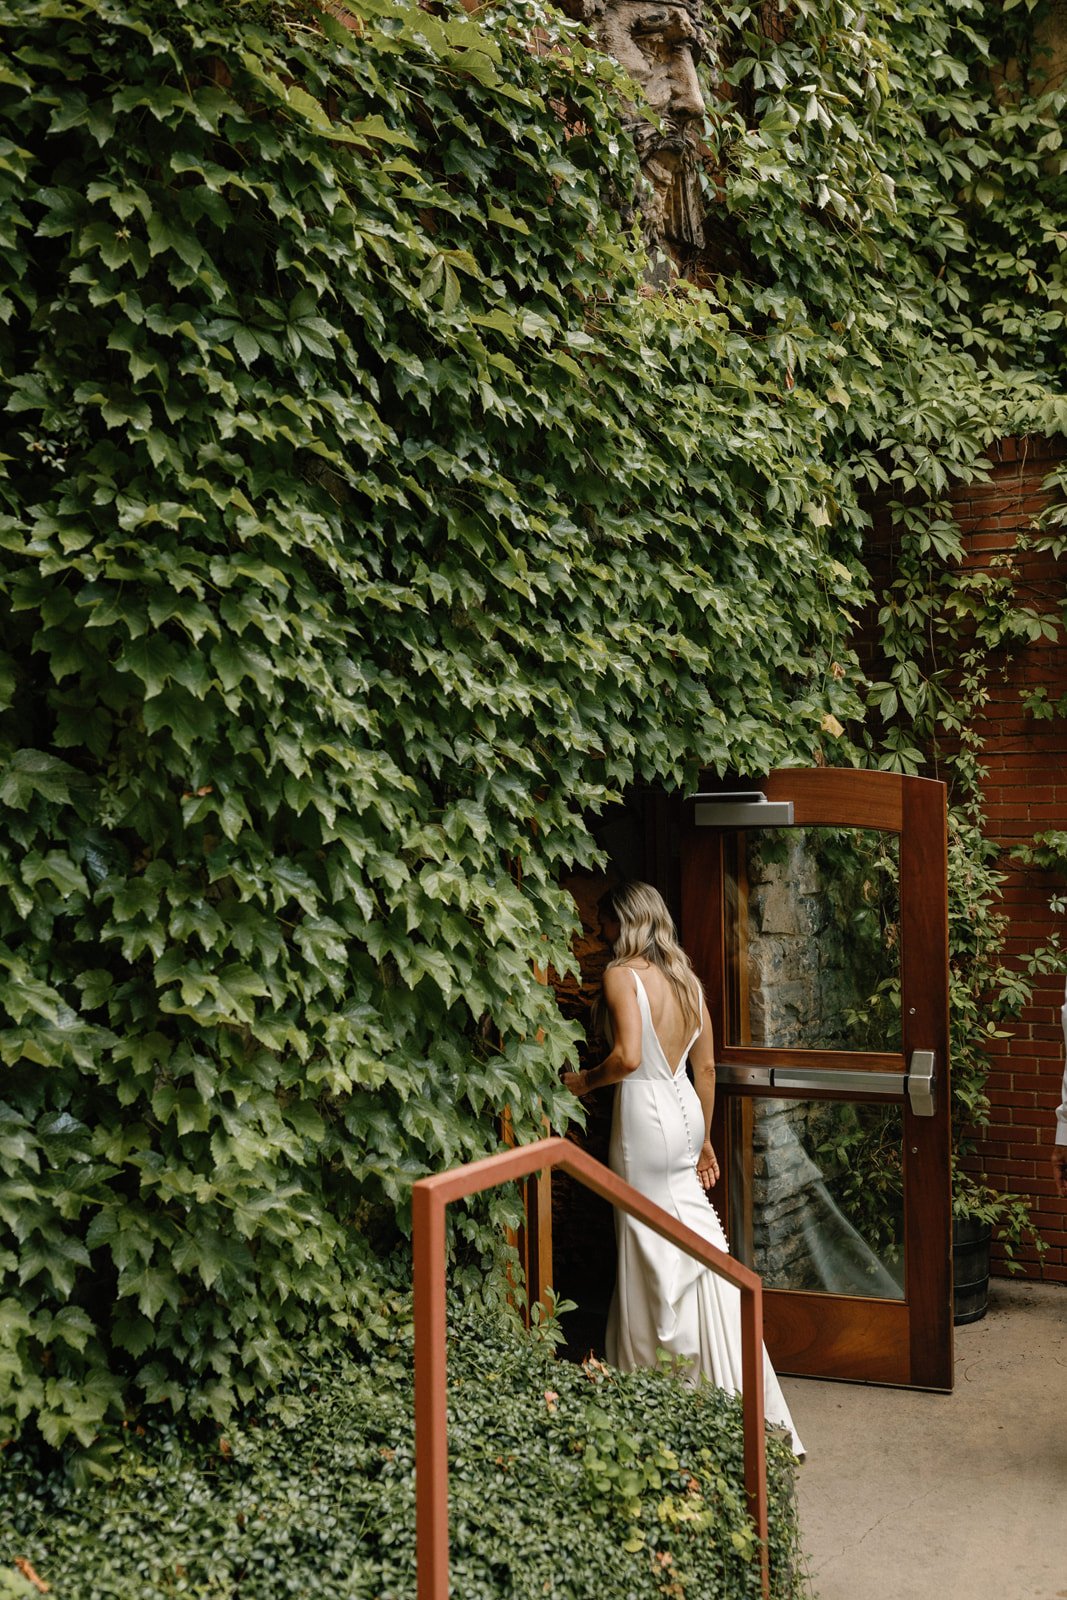 Bride going into catacombs in front of green wall